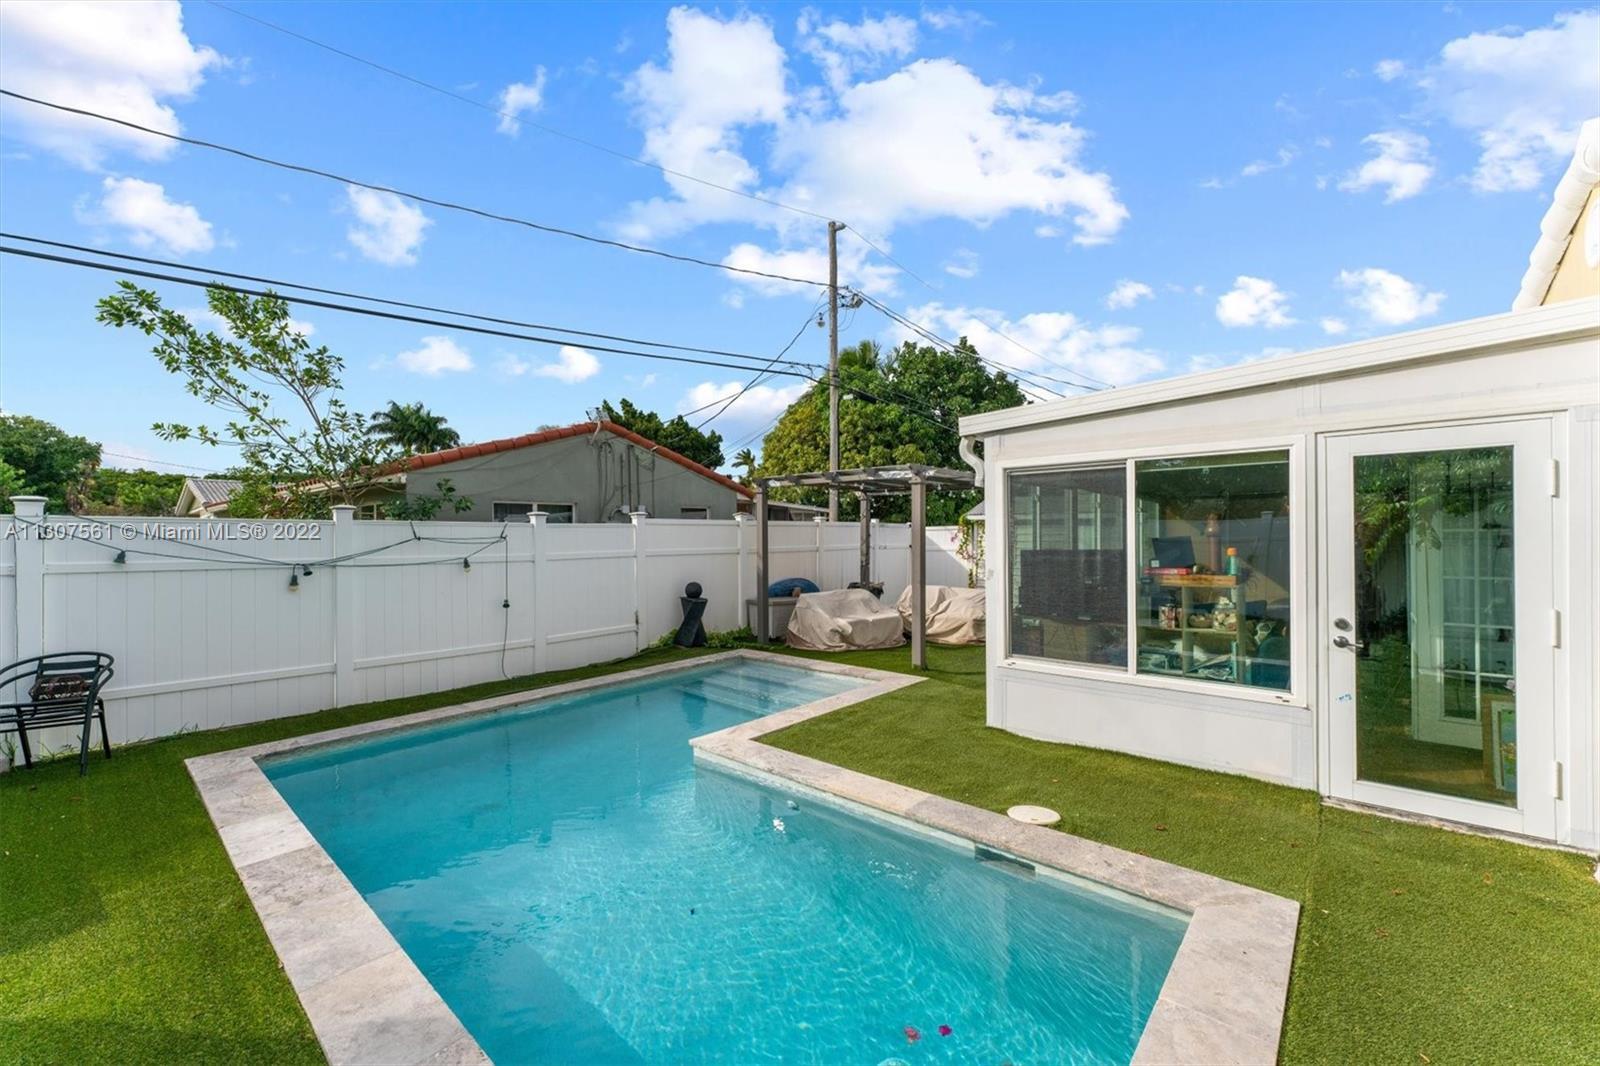 Beautiful corner property with a pool, 2.5 miles from the beach! This lovely 3 bed, 2 bath home is s